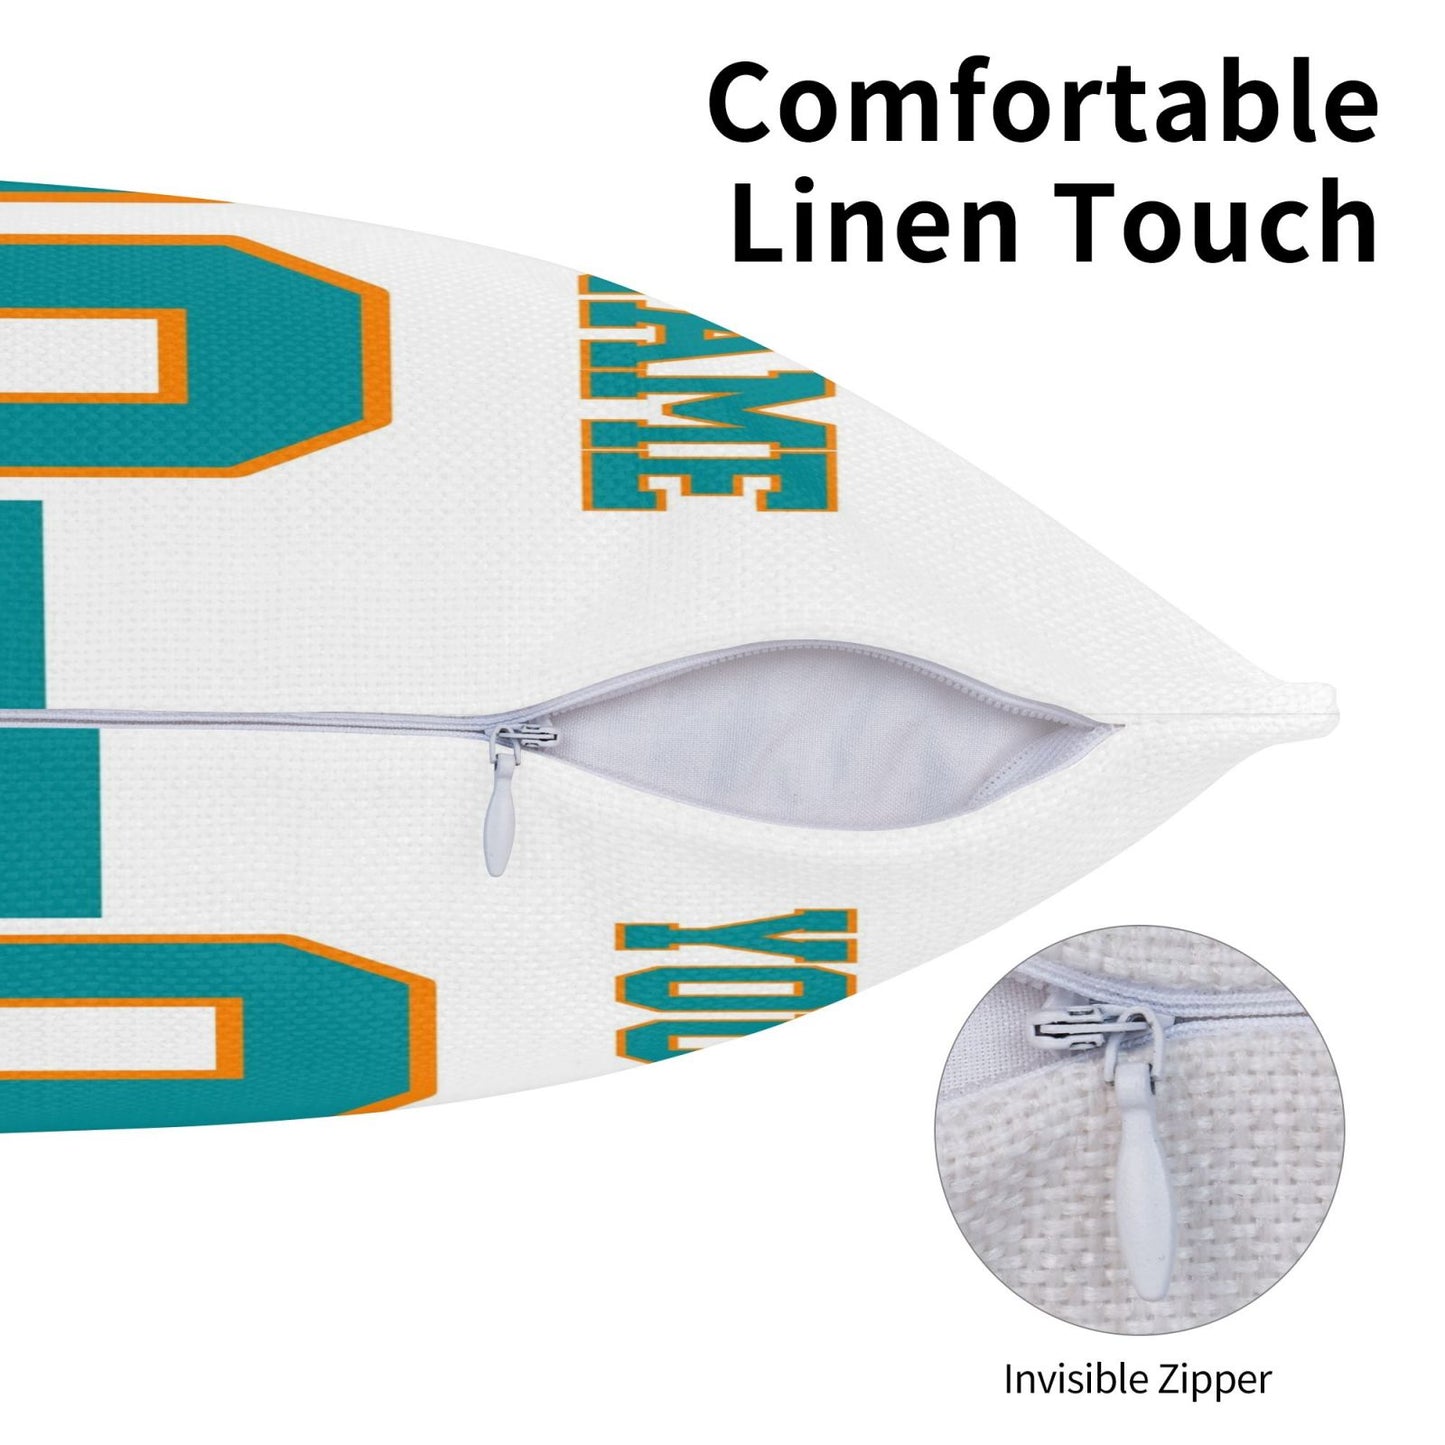 Customized Miami Dolphins Football Team Decorative Throw Pillow Case Print Personalized Football Style Fans Letters & Number White Pillowcase Birthday Gift